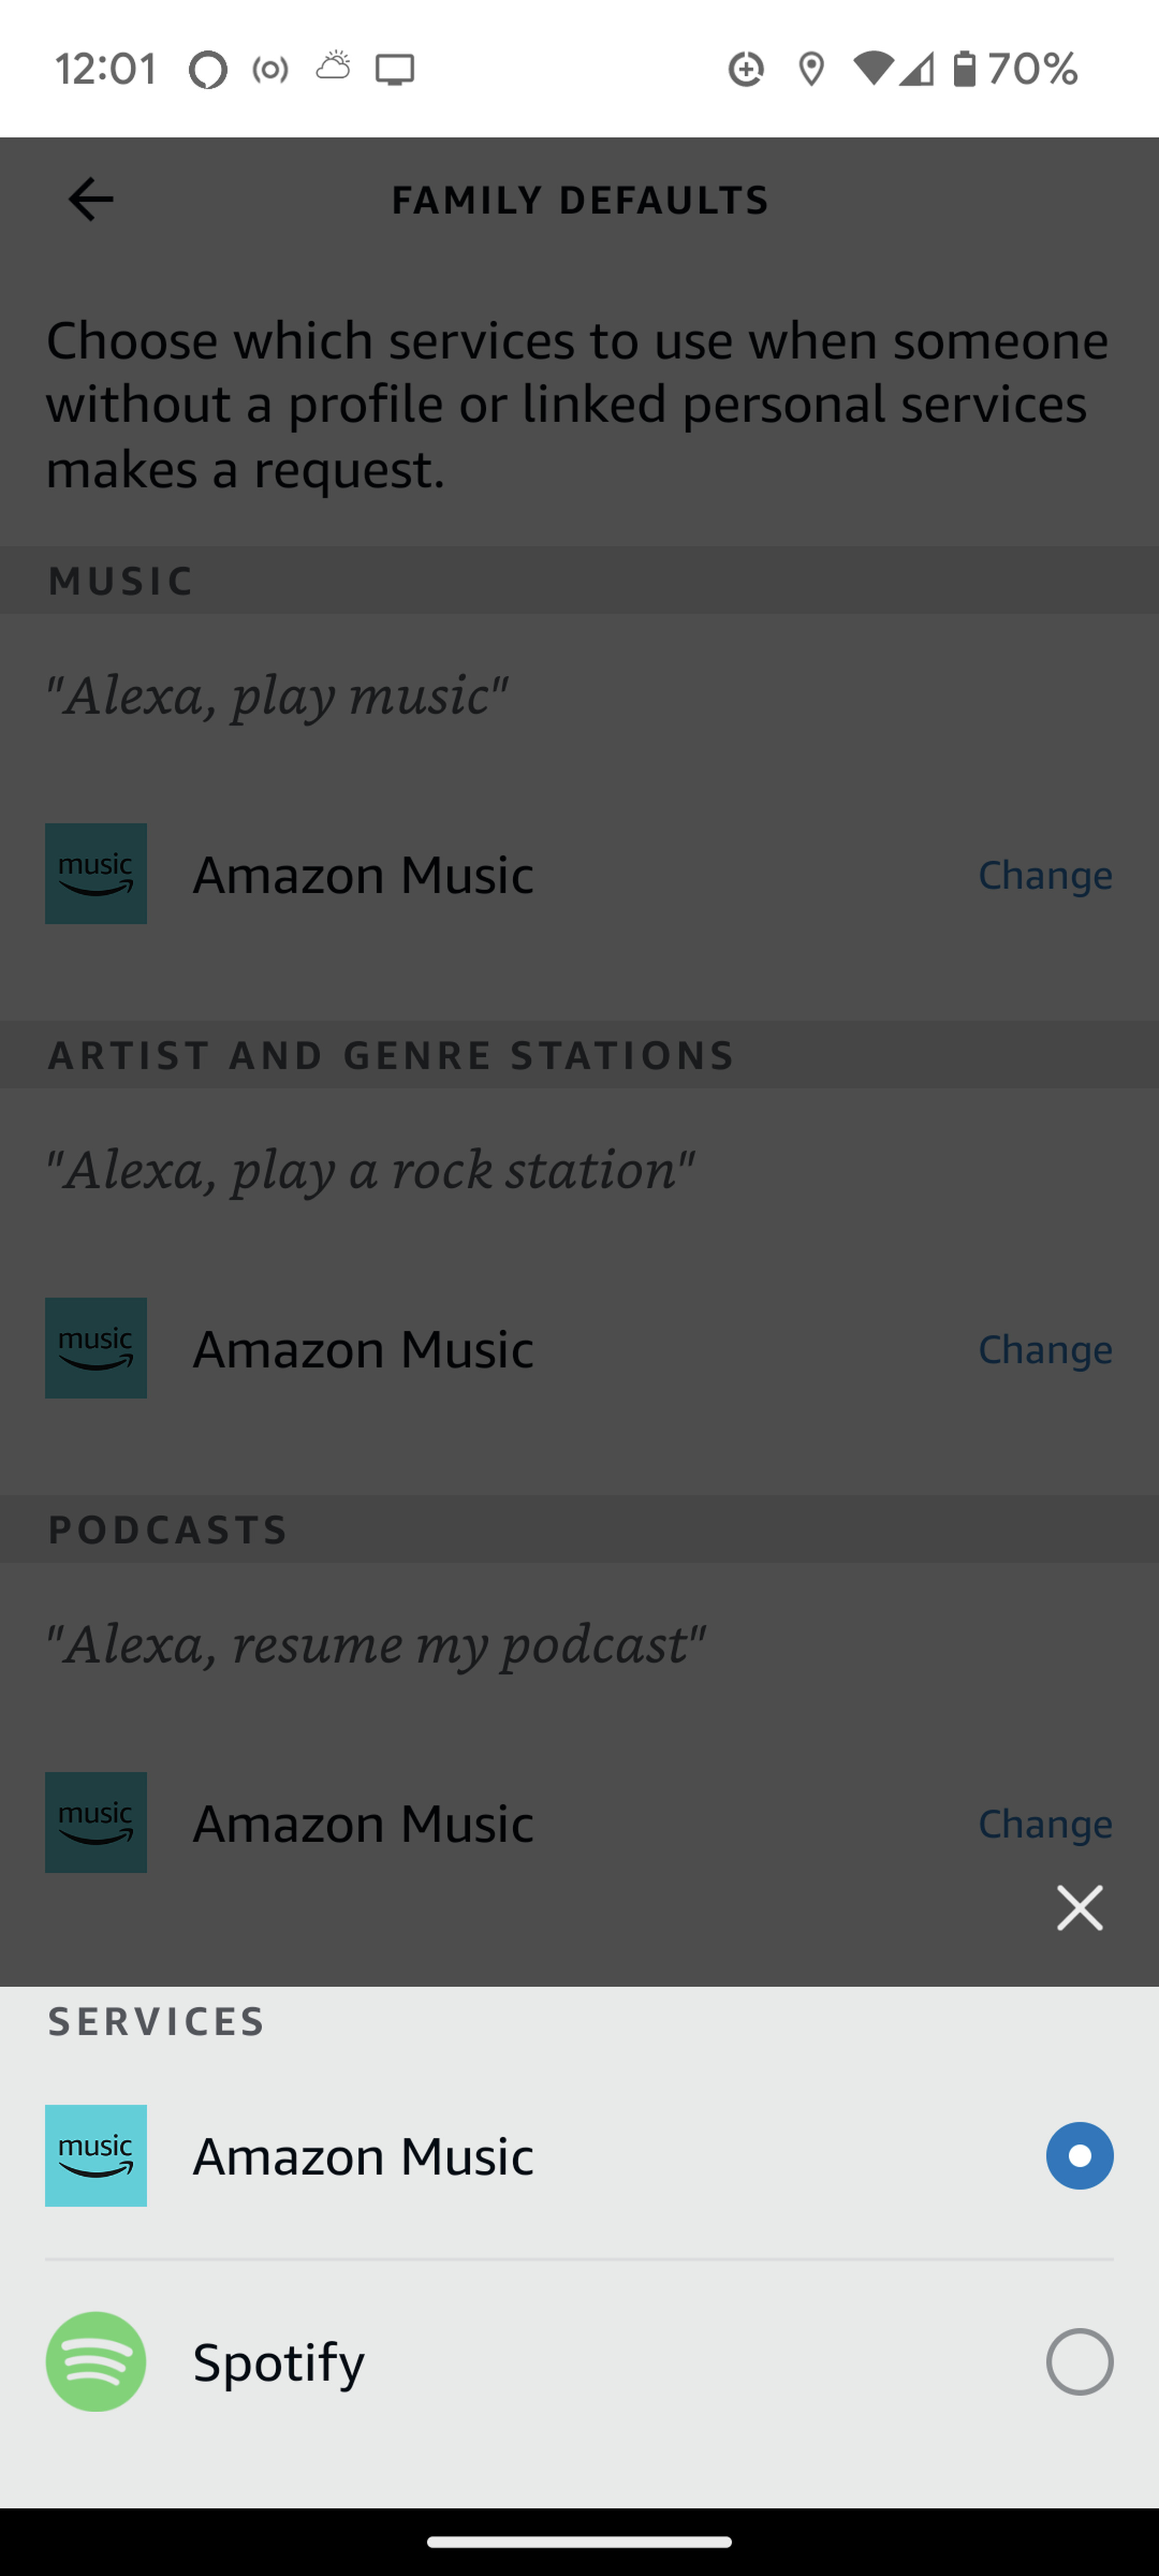 Menu popping up from bottom headed Services and offering either Amazon Music or Spotify.